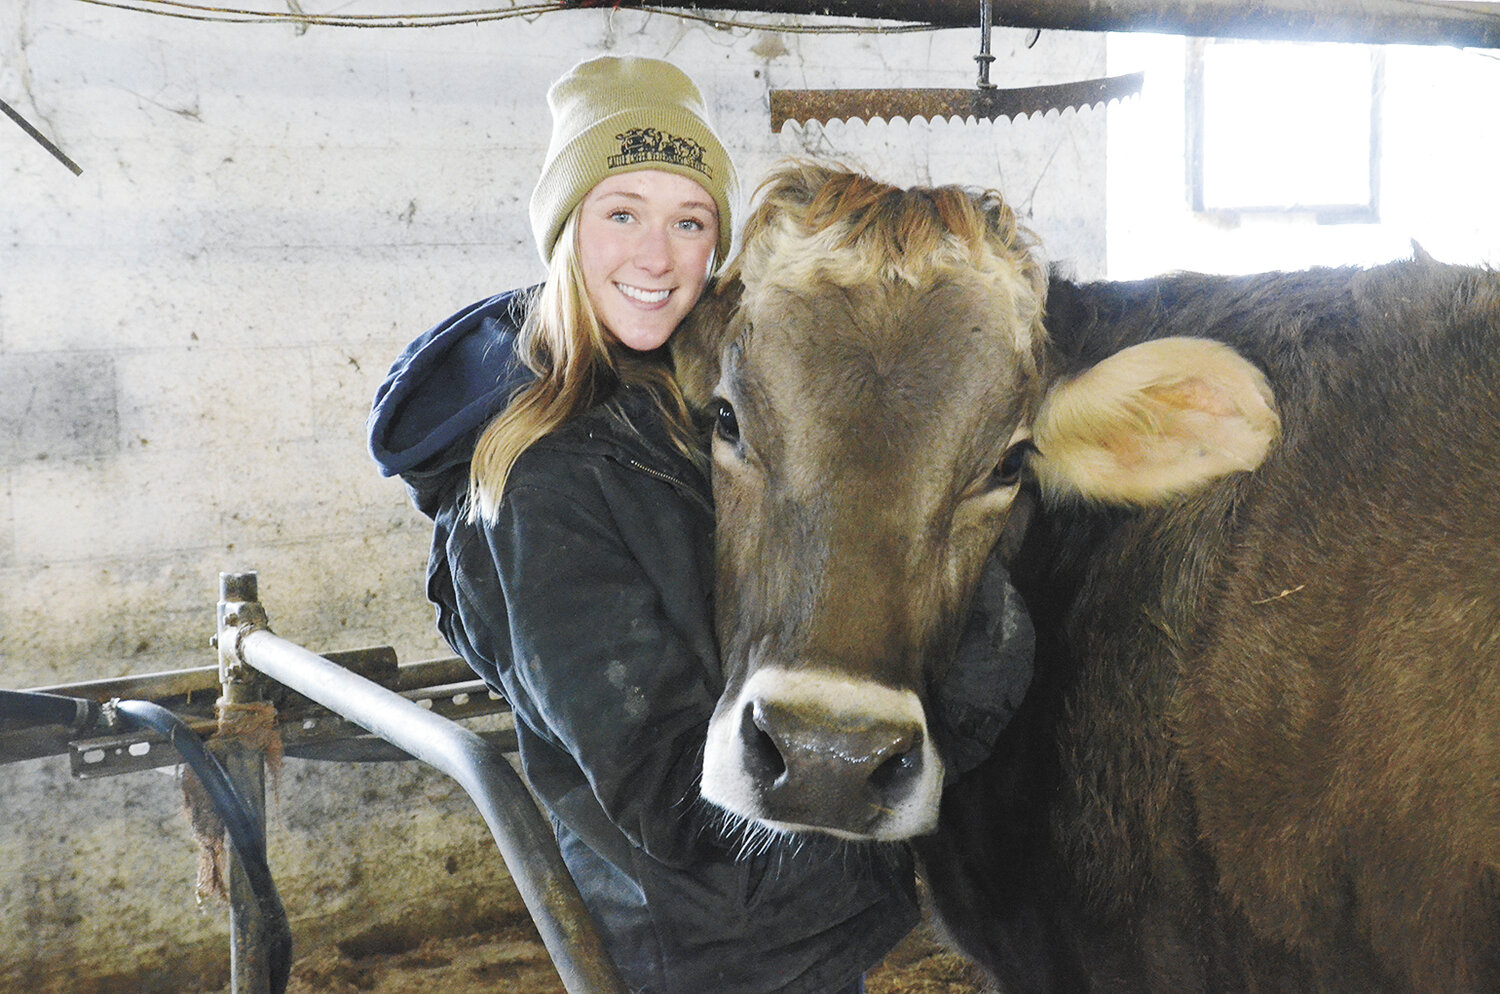 Madalyn Nielsen poses with a favorite Brown Swiss cow Jan. 11 in the tiestall barn on her family’s farm near Lake Mills, Wisconsin. Nielsen began buying Brown Swiss six years ago and now owns 12 head.